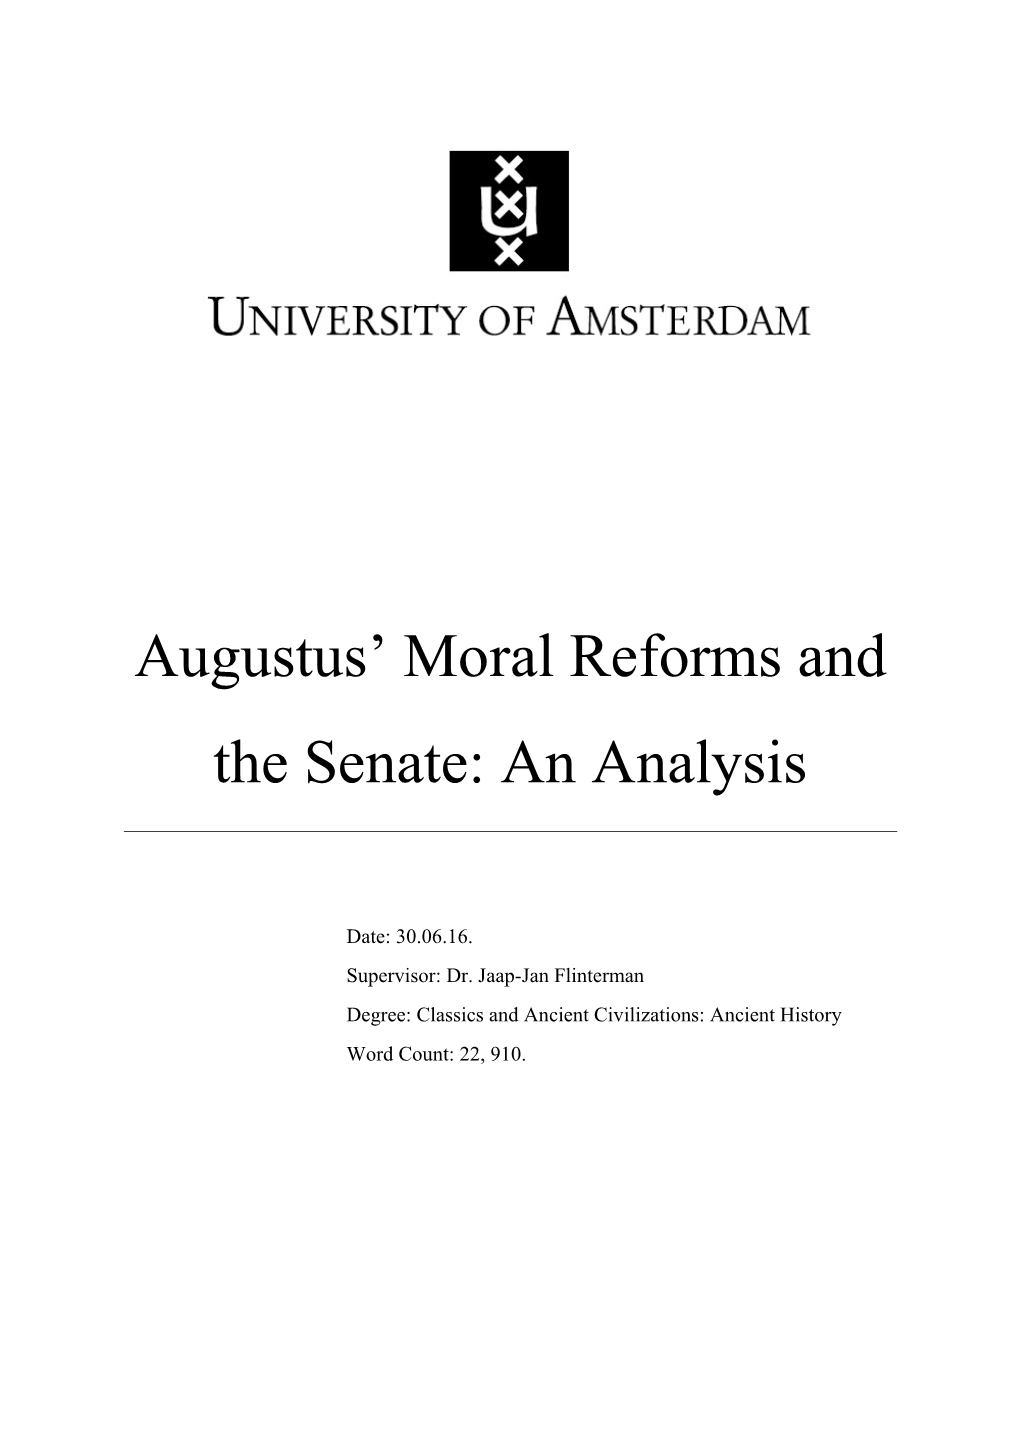 Augustus' Moral Reforms and the Senate